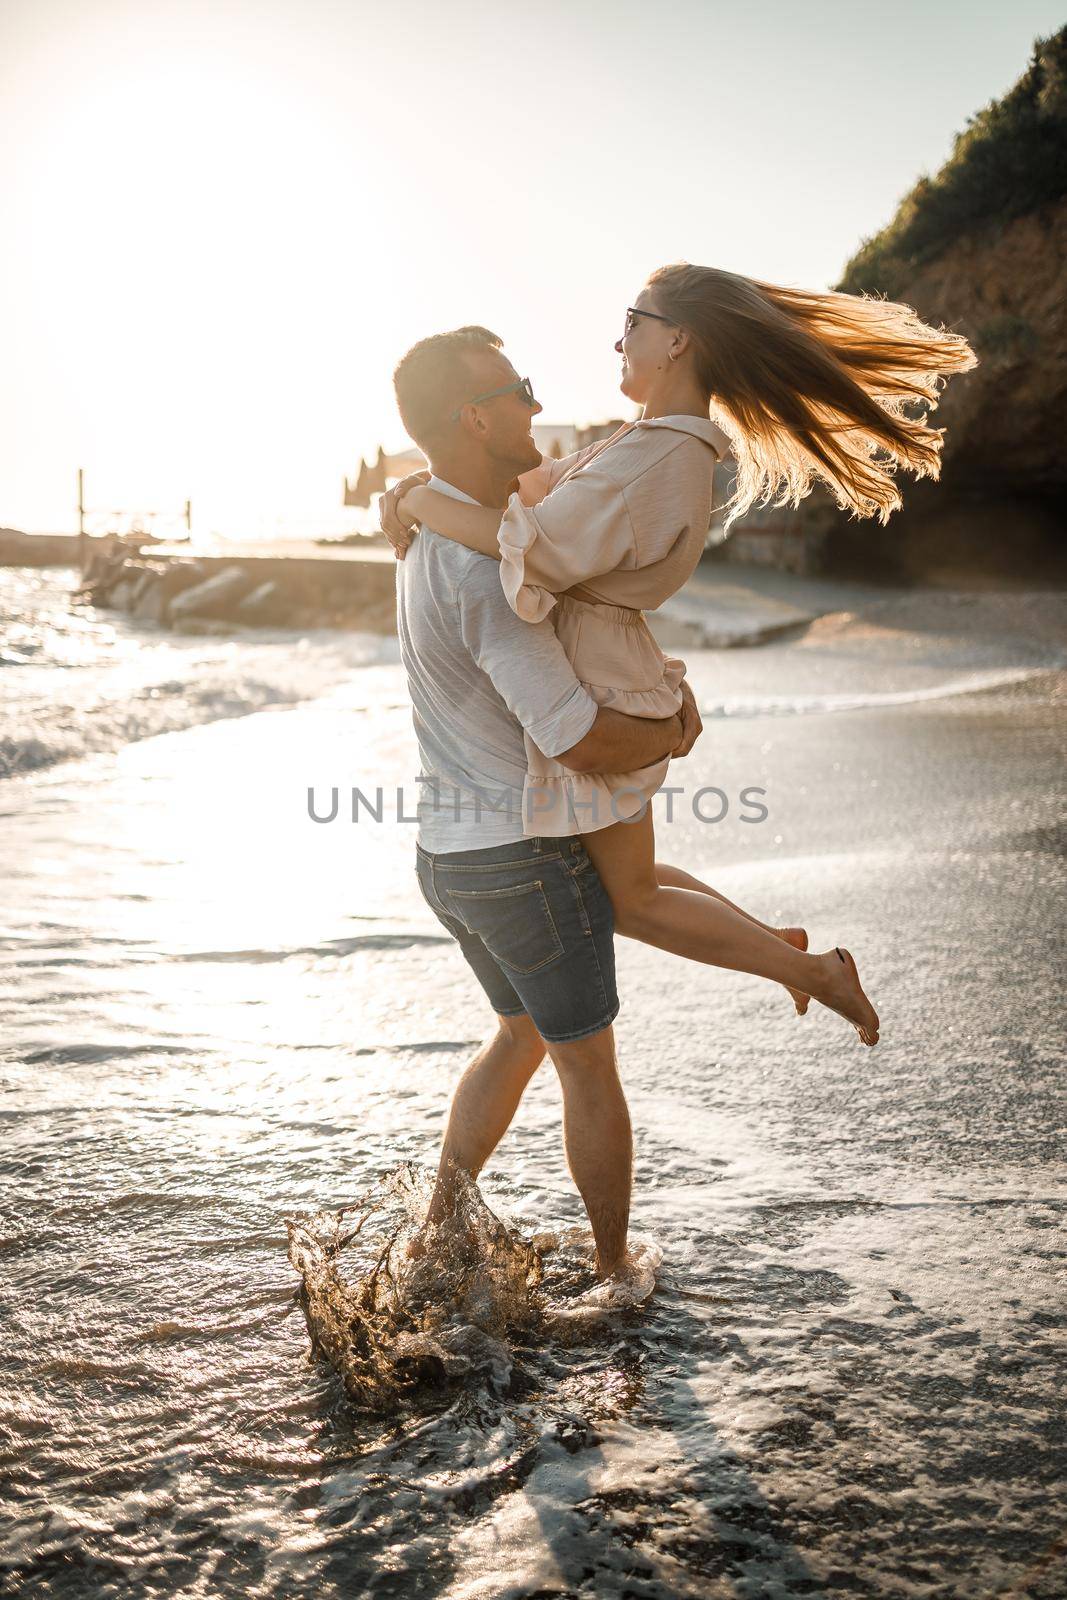 A couple in love is walking on the beach near the sea. Young family at sunset by the mediterranean sea. Summer vacation concept